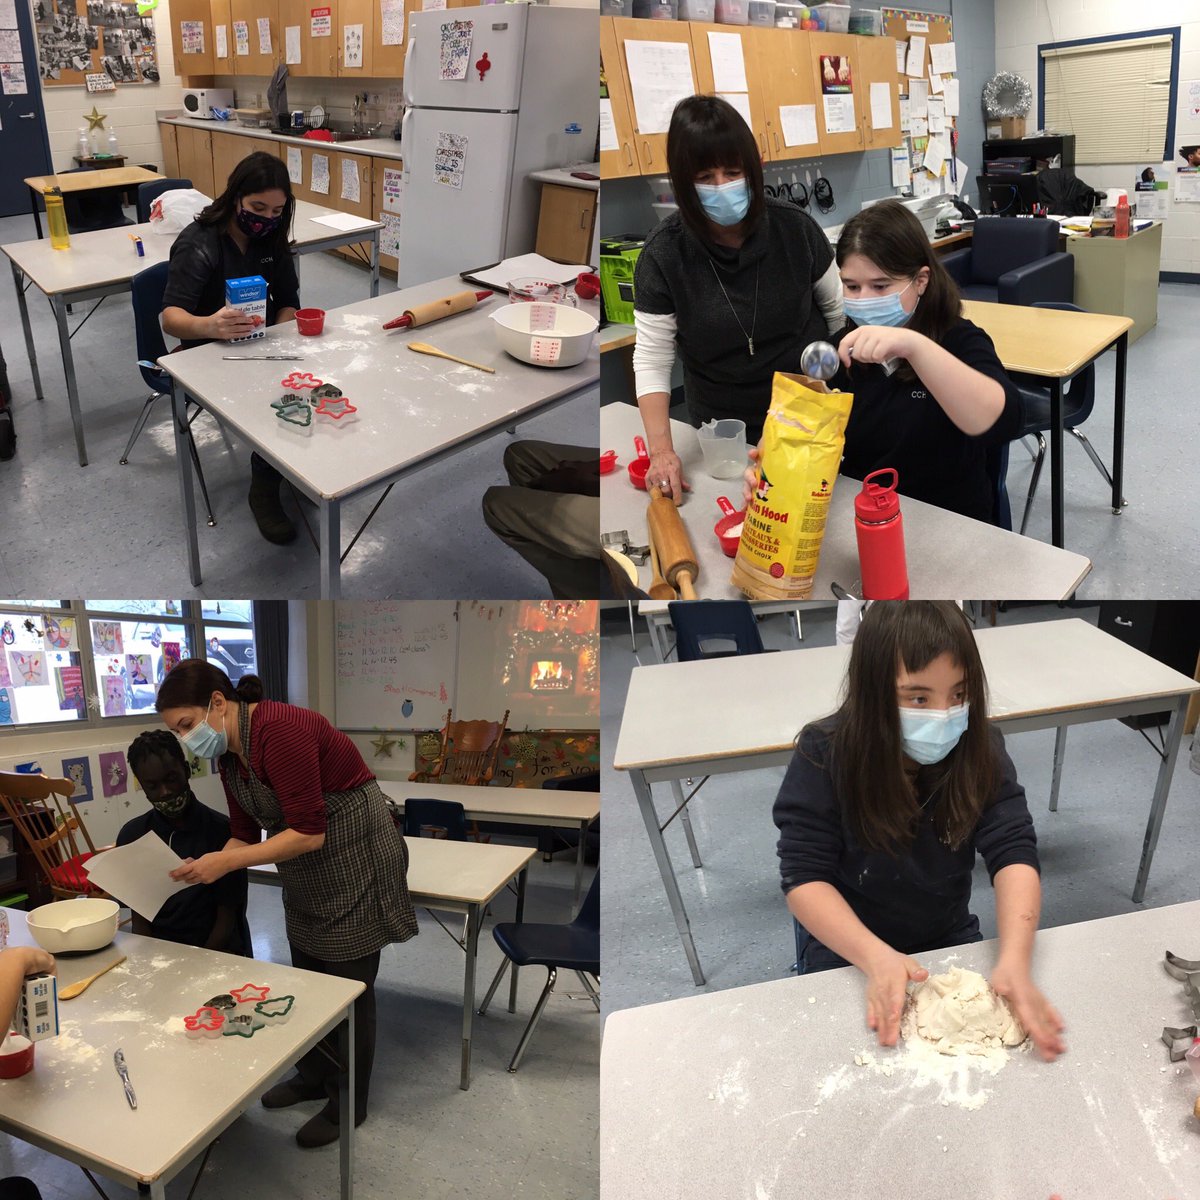 CCH’s School to Community students started off the Christmas season by making salt dough ornaments. Ms.Simas and Mrs. Sentjens were able to join us for the fun!